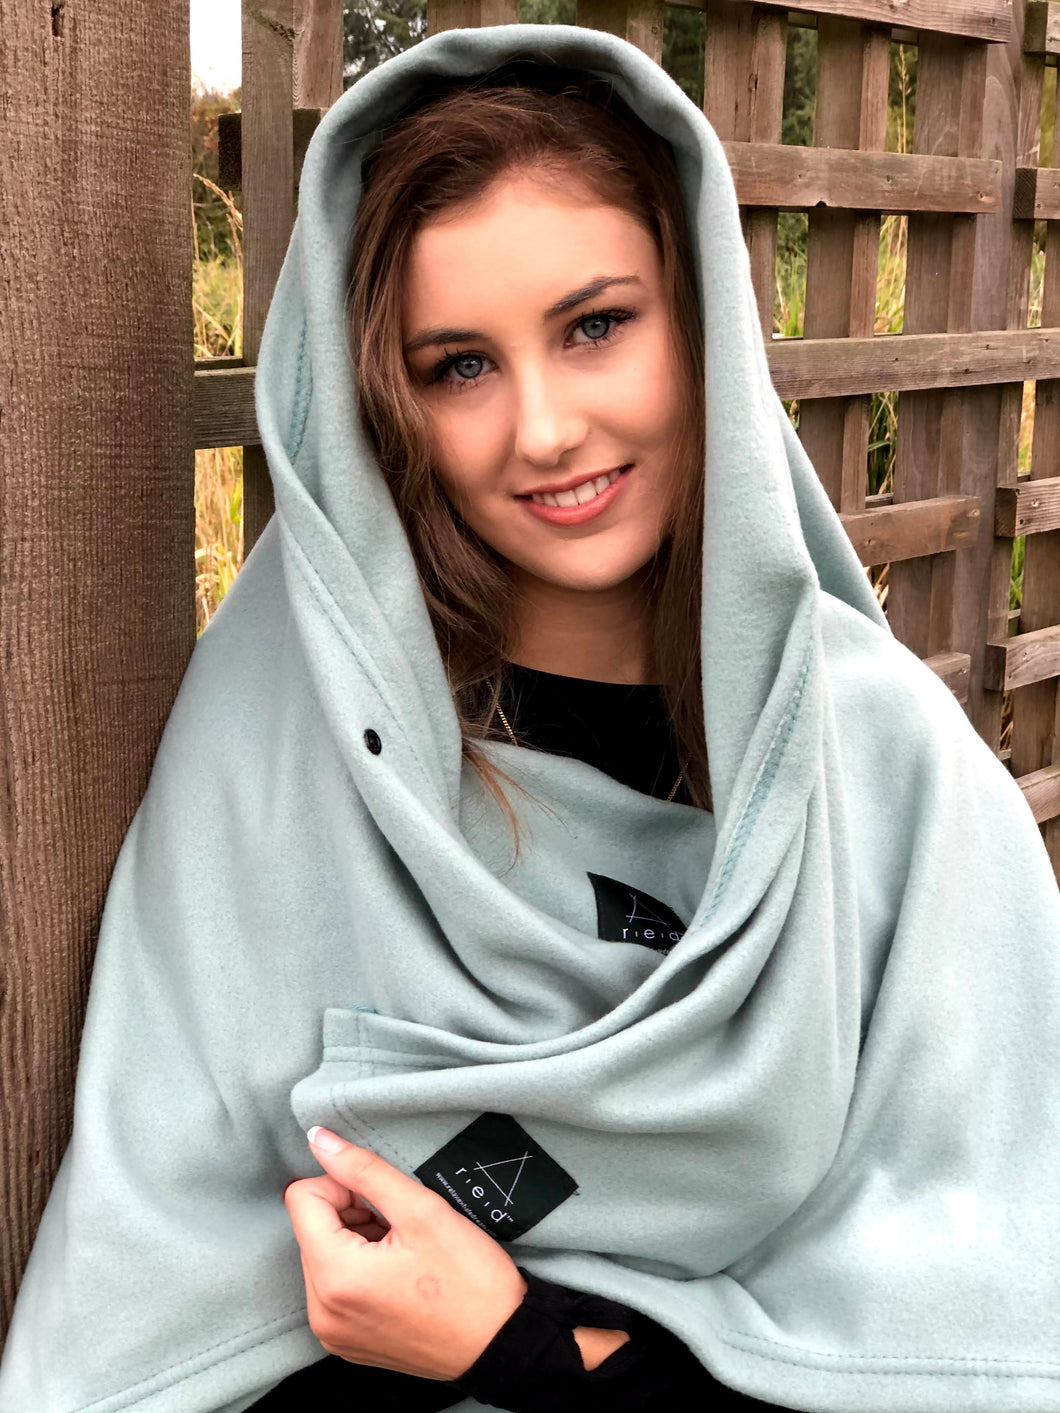 The Lay-Over Blanket - Wearable Blanket for Travel